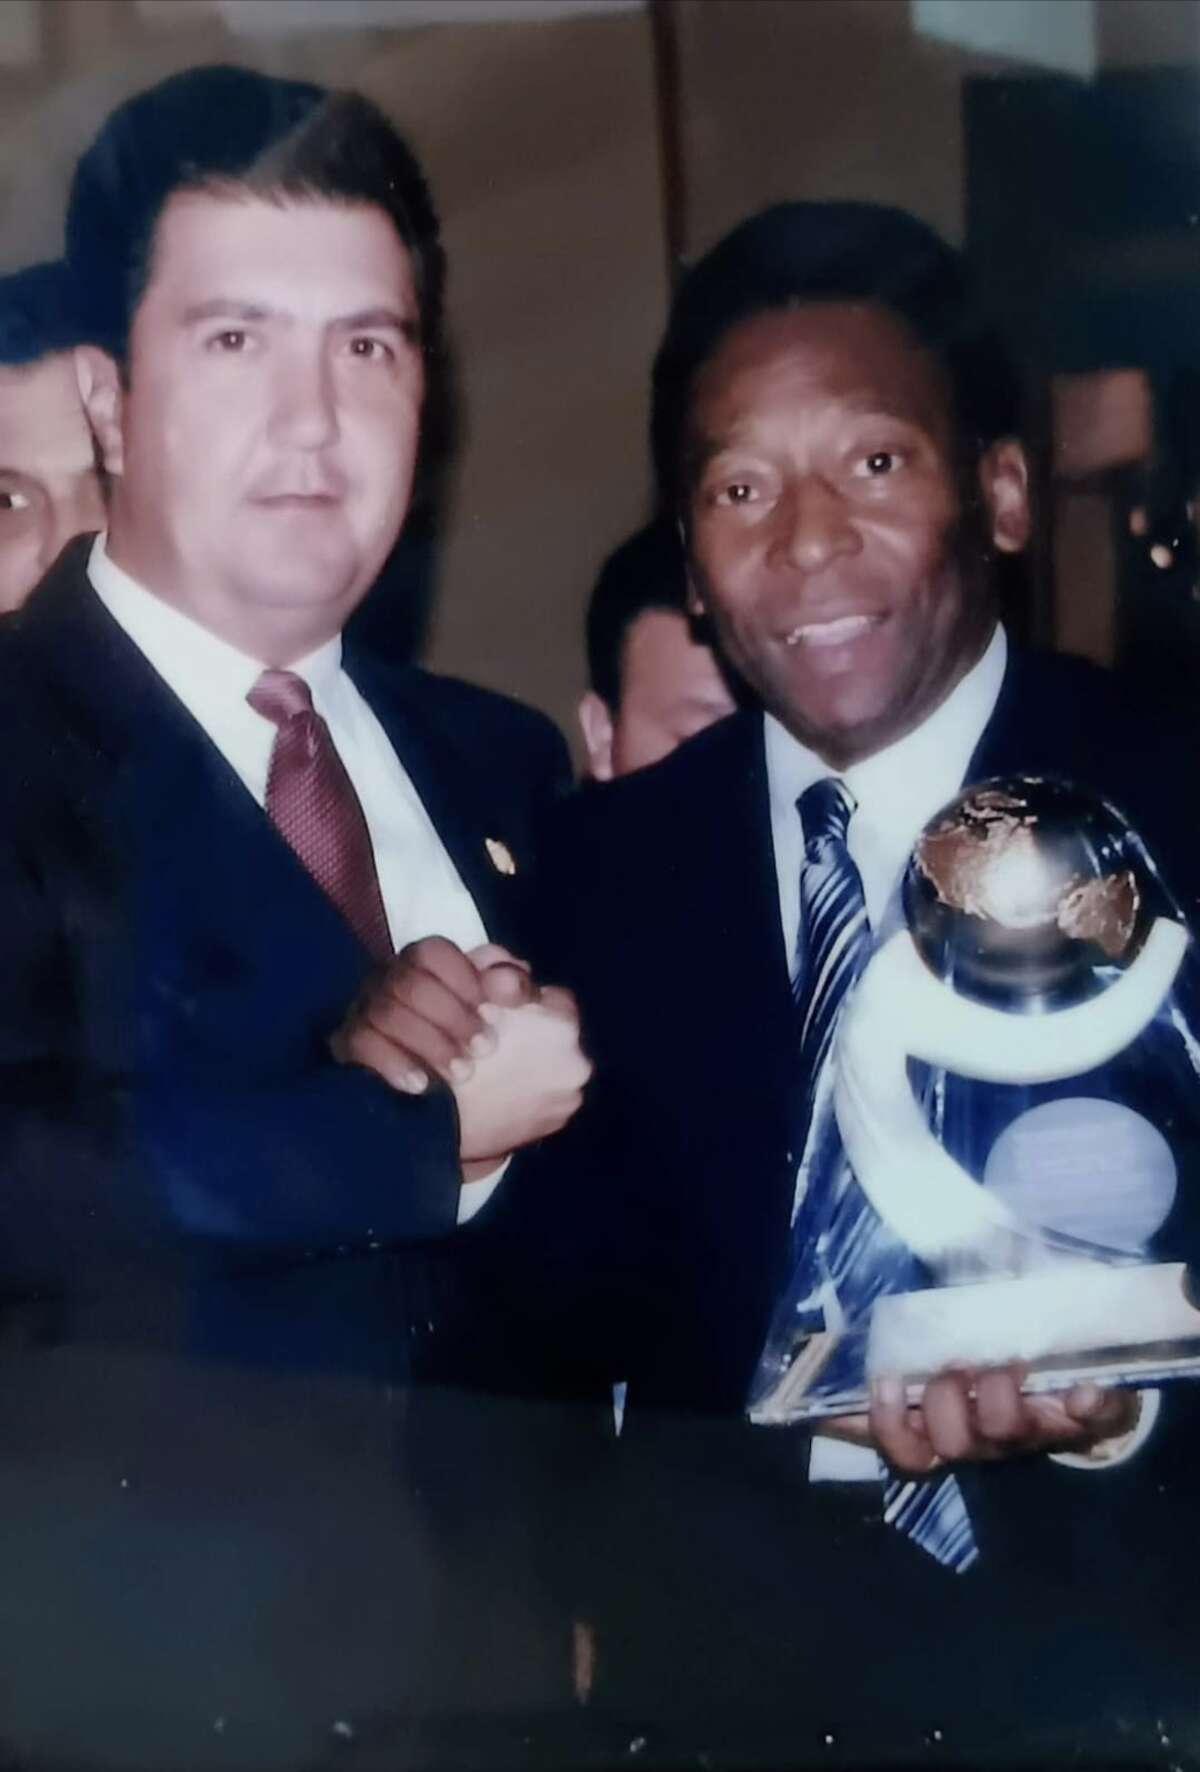 Jorge Alberto Vinals, local businessman from the Dos laredos, with Pele. Pele visited the city of Nuevo Laredo on November 2006 to offer a conference to the youth of the community to speak to them about the importance of education and playing sports instead of getting in trouble or substance absue.